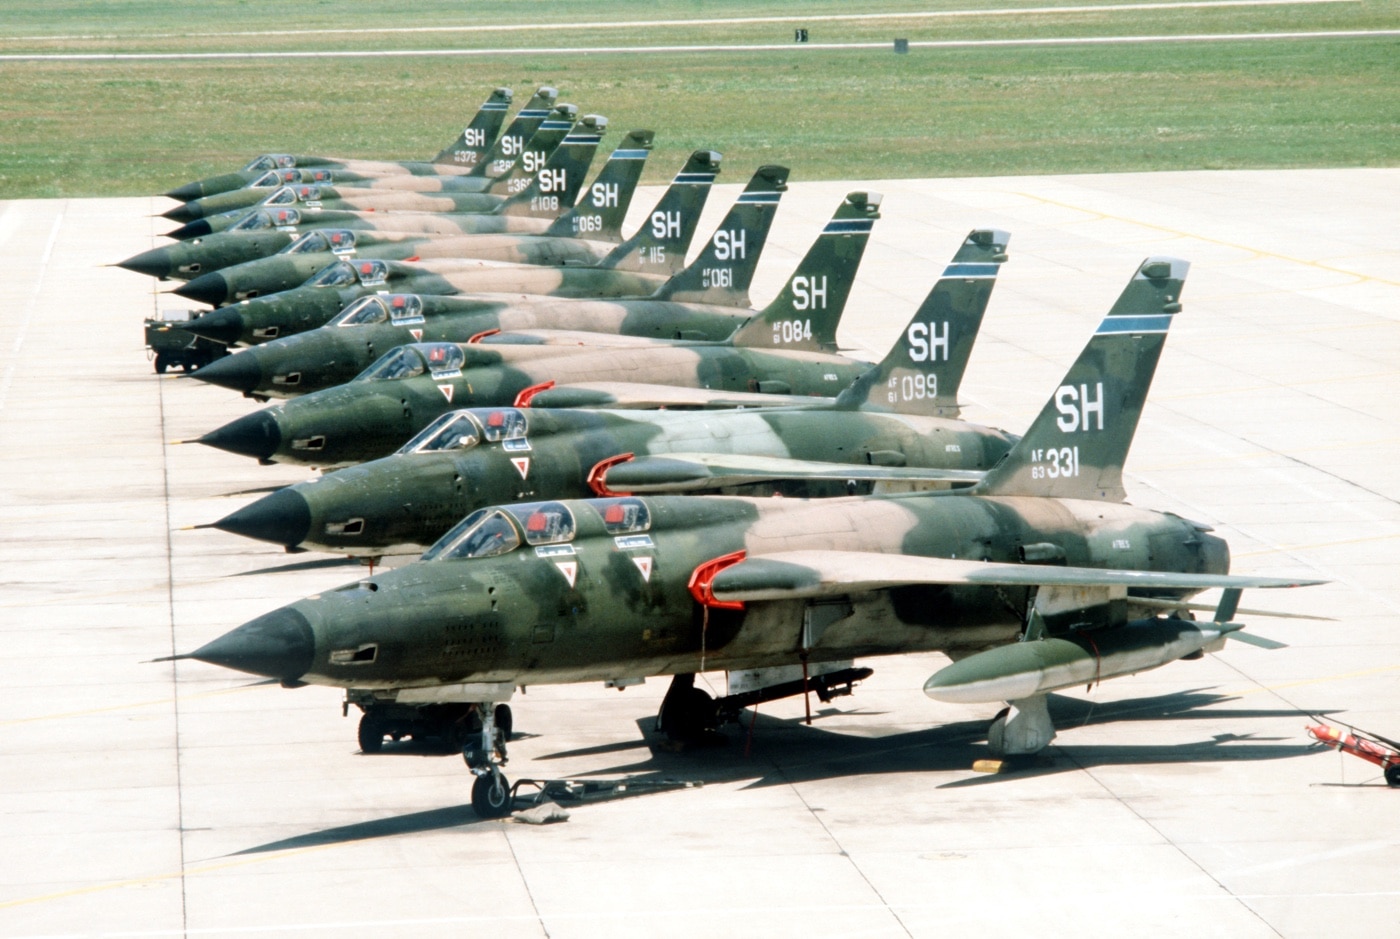 f-105 airplanes in 507th tactical fighter group